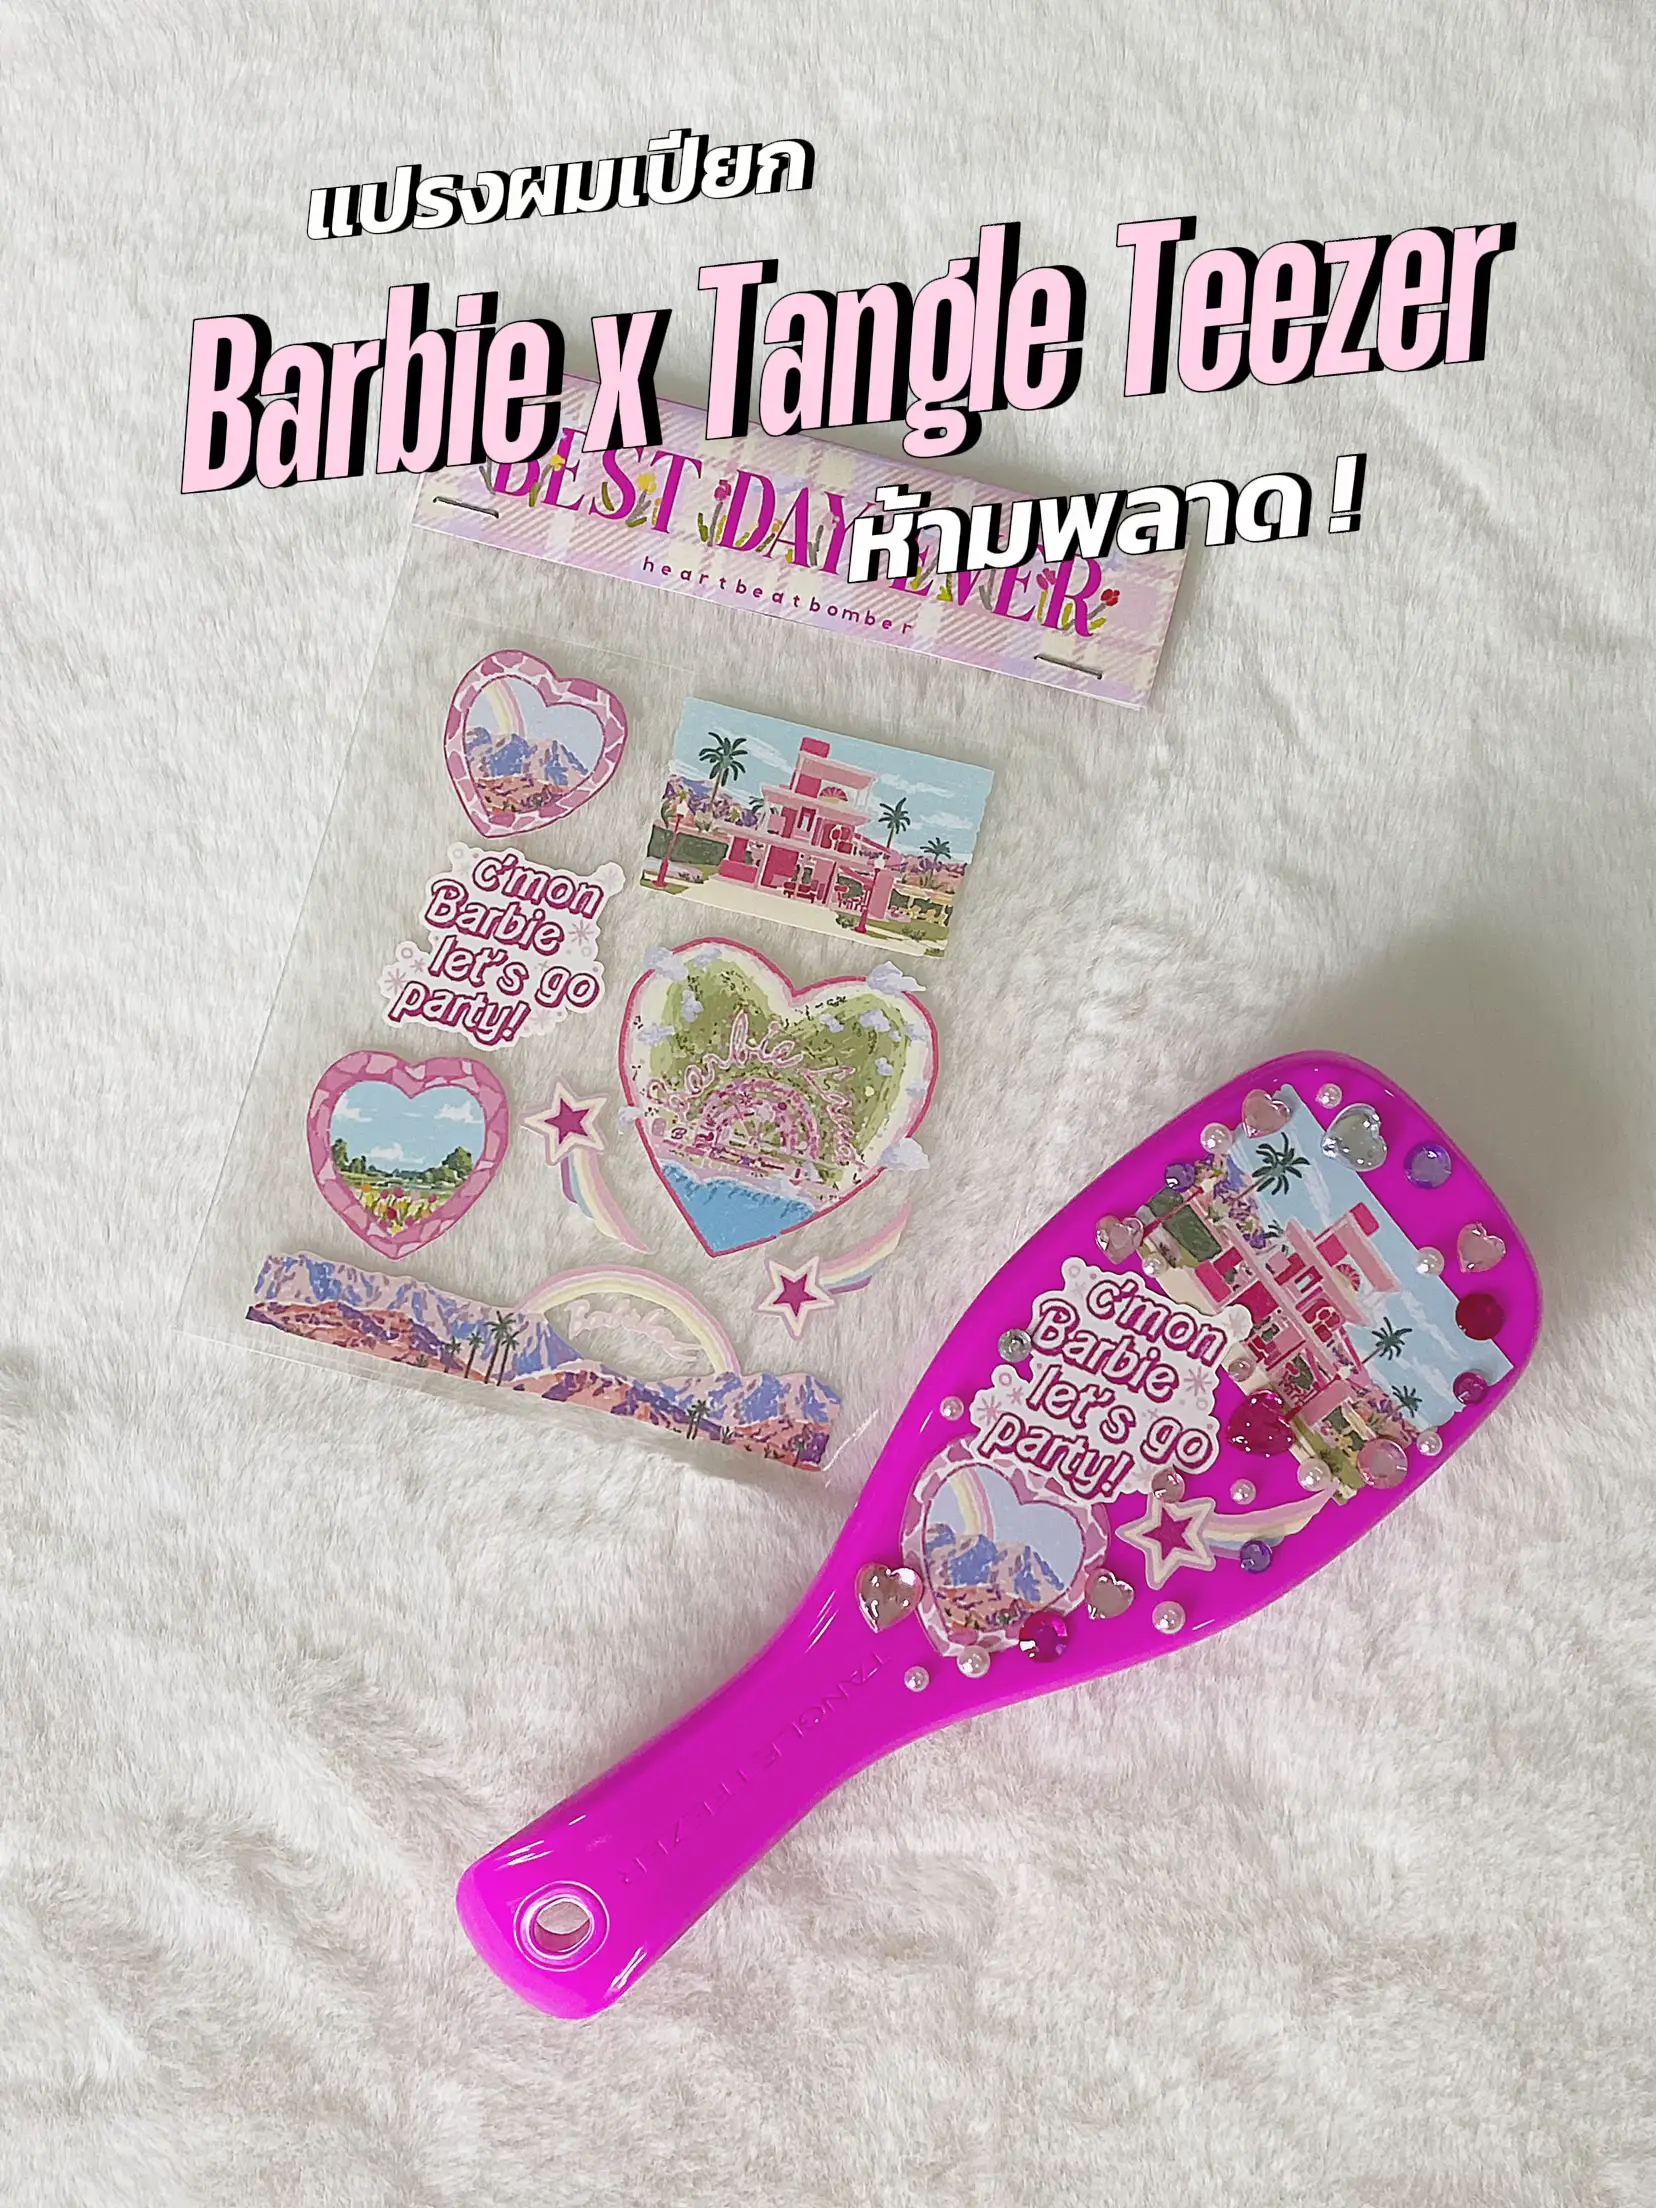 Barbie's hair brush. It's just beautiful to carry